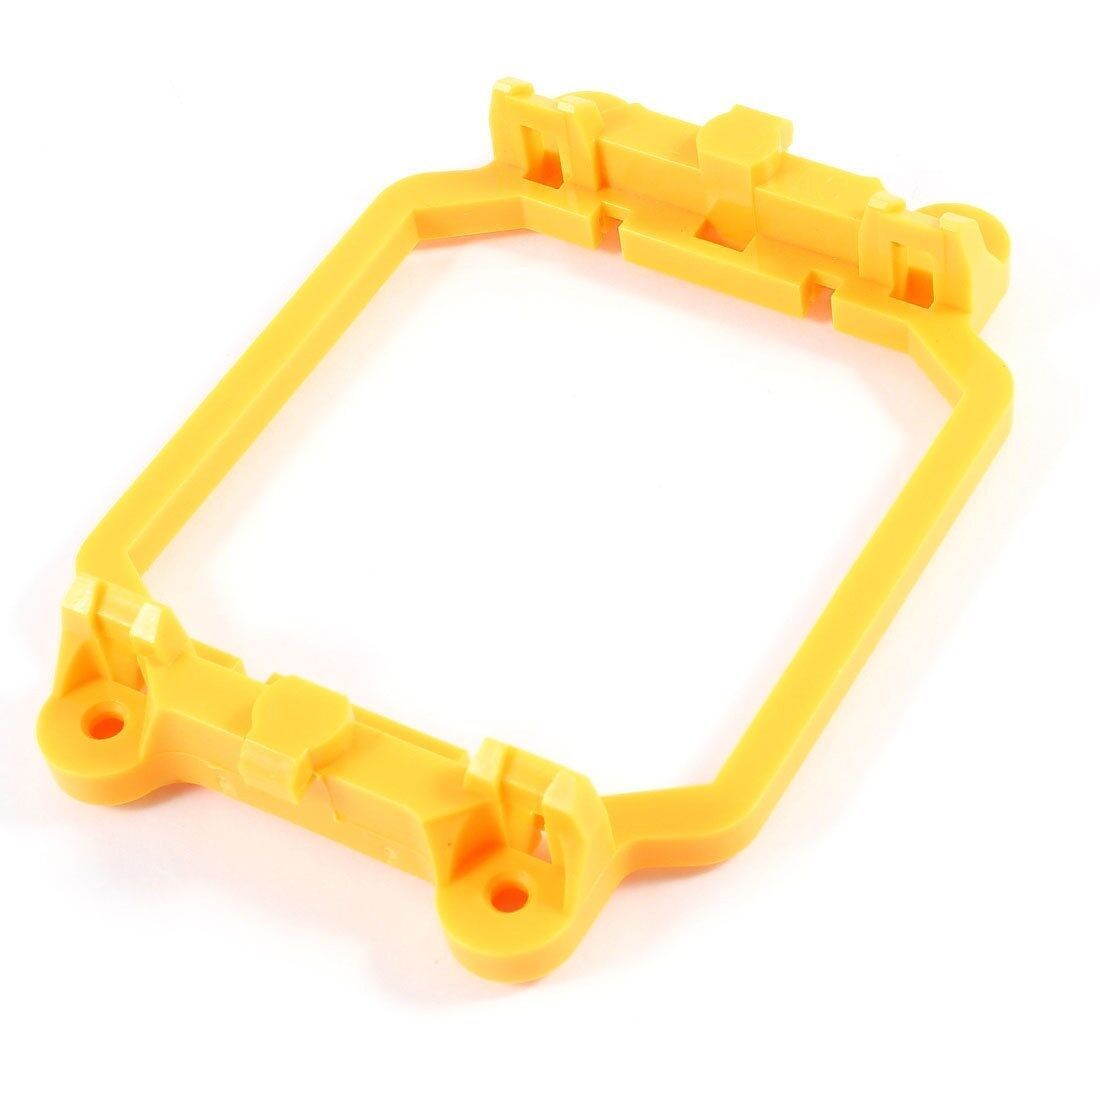 Primary image for *Same Day 3Pm Pst*New* Yellow Retention Bracket For Amd Socket Fm2